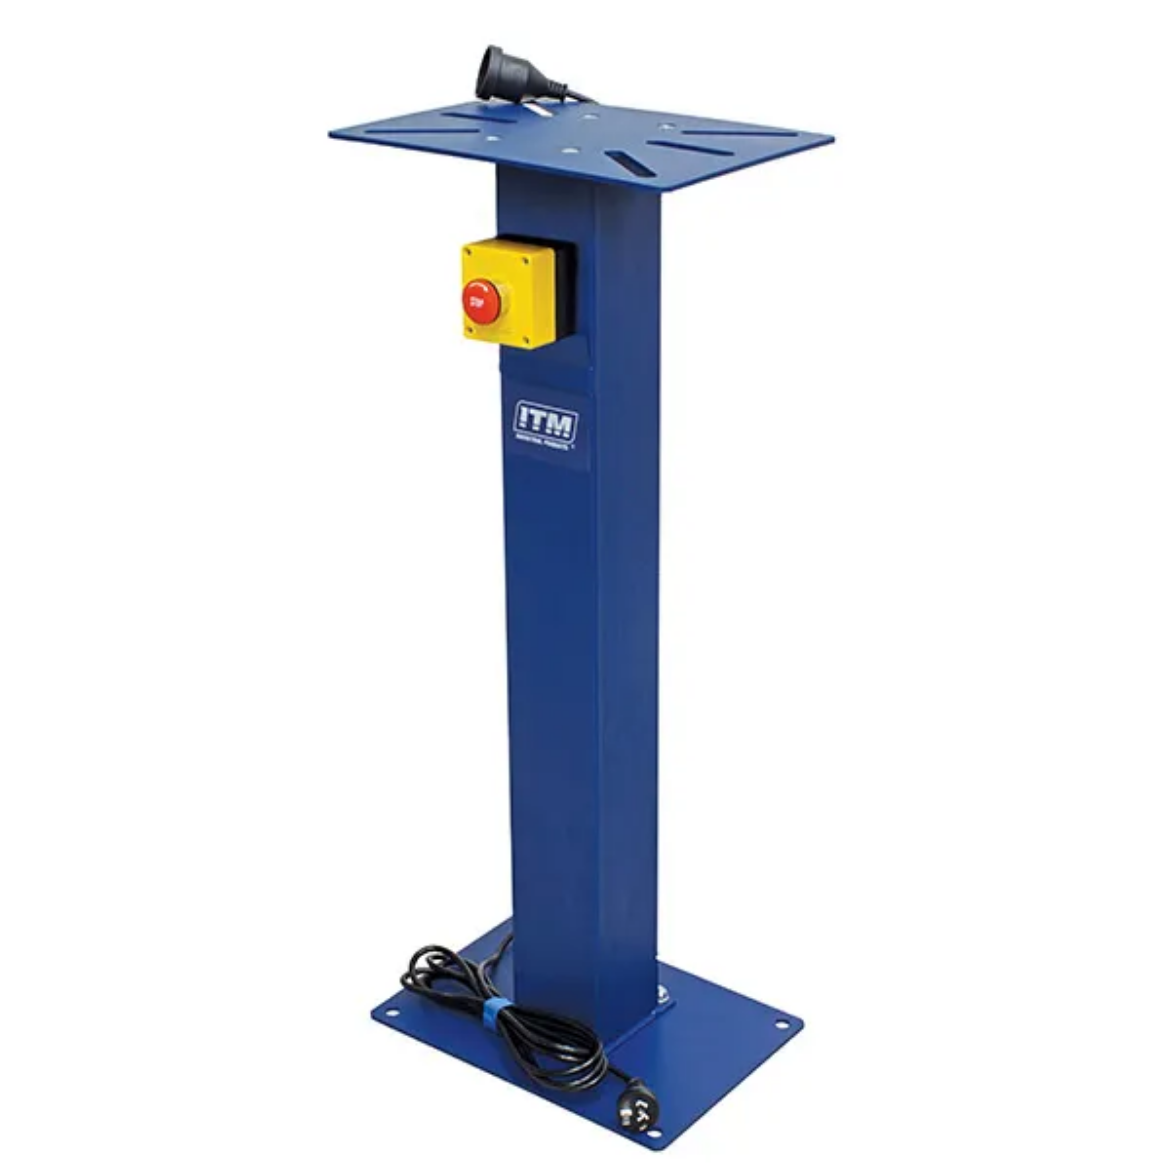 Picture of ITM HEAVY DUTY BENCH GRINDER STAND, WITH EMERGENCY STOP SWITCH, SUITS 200MM & 250MM GRINDERS